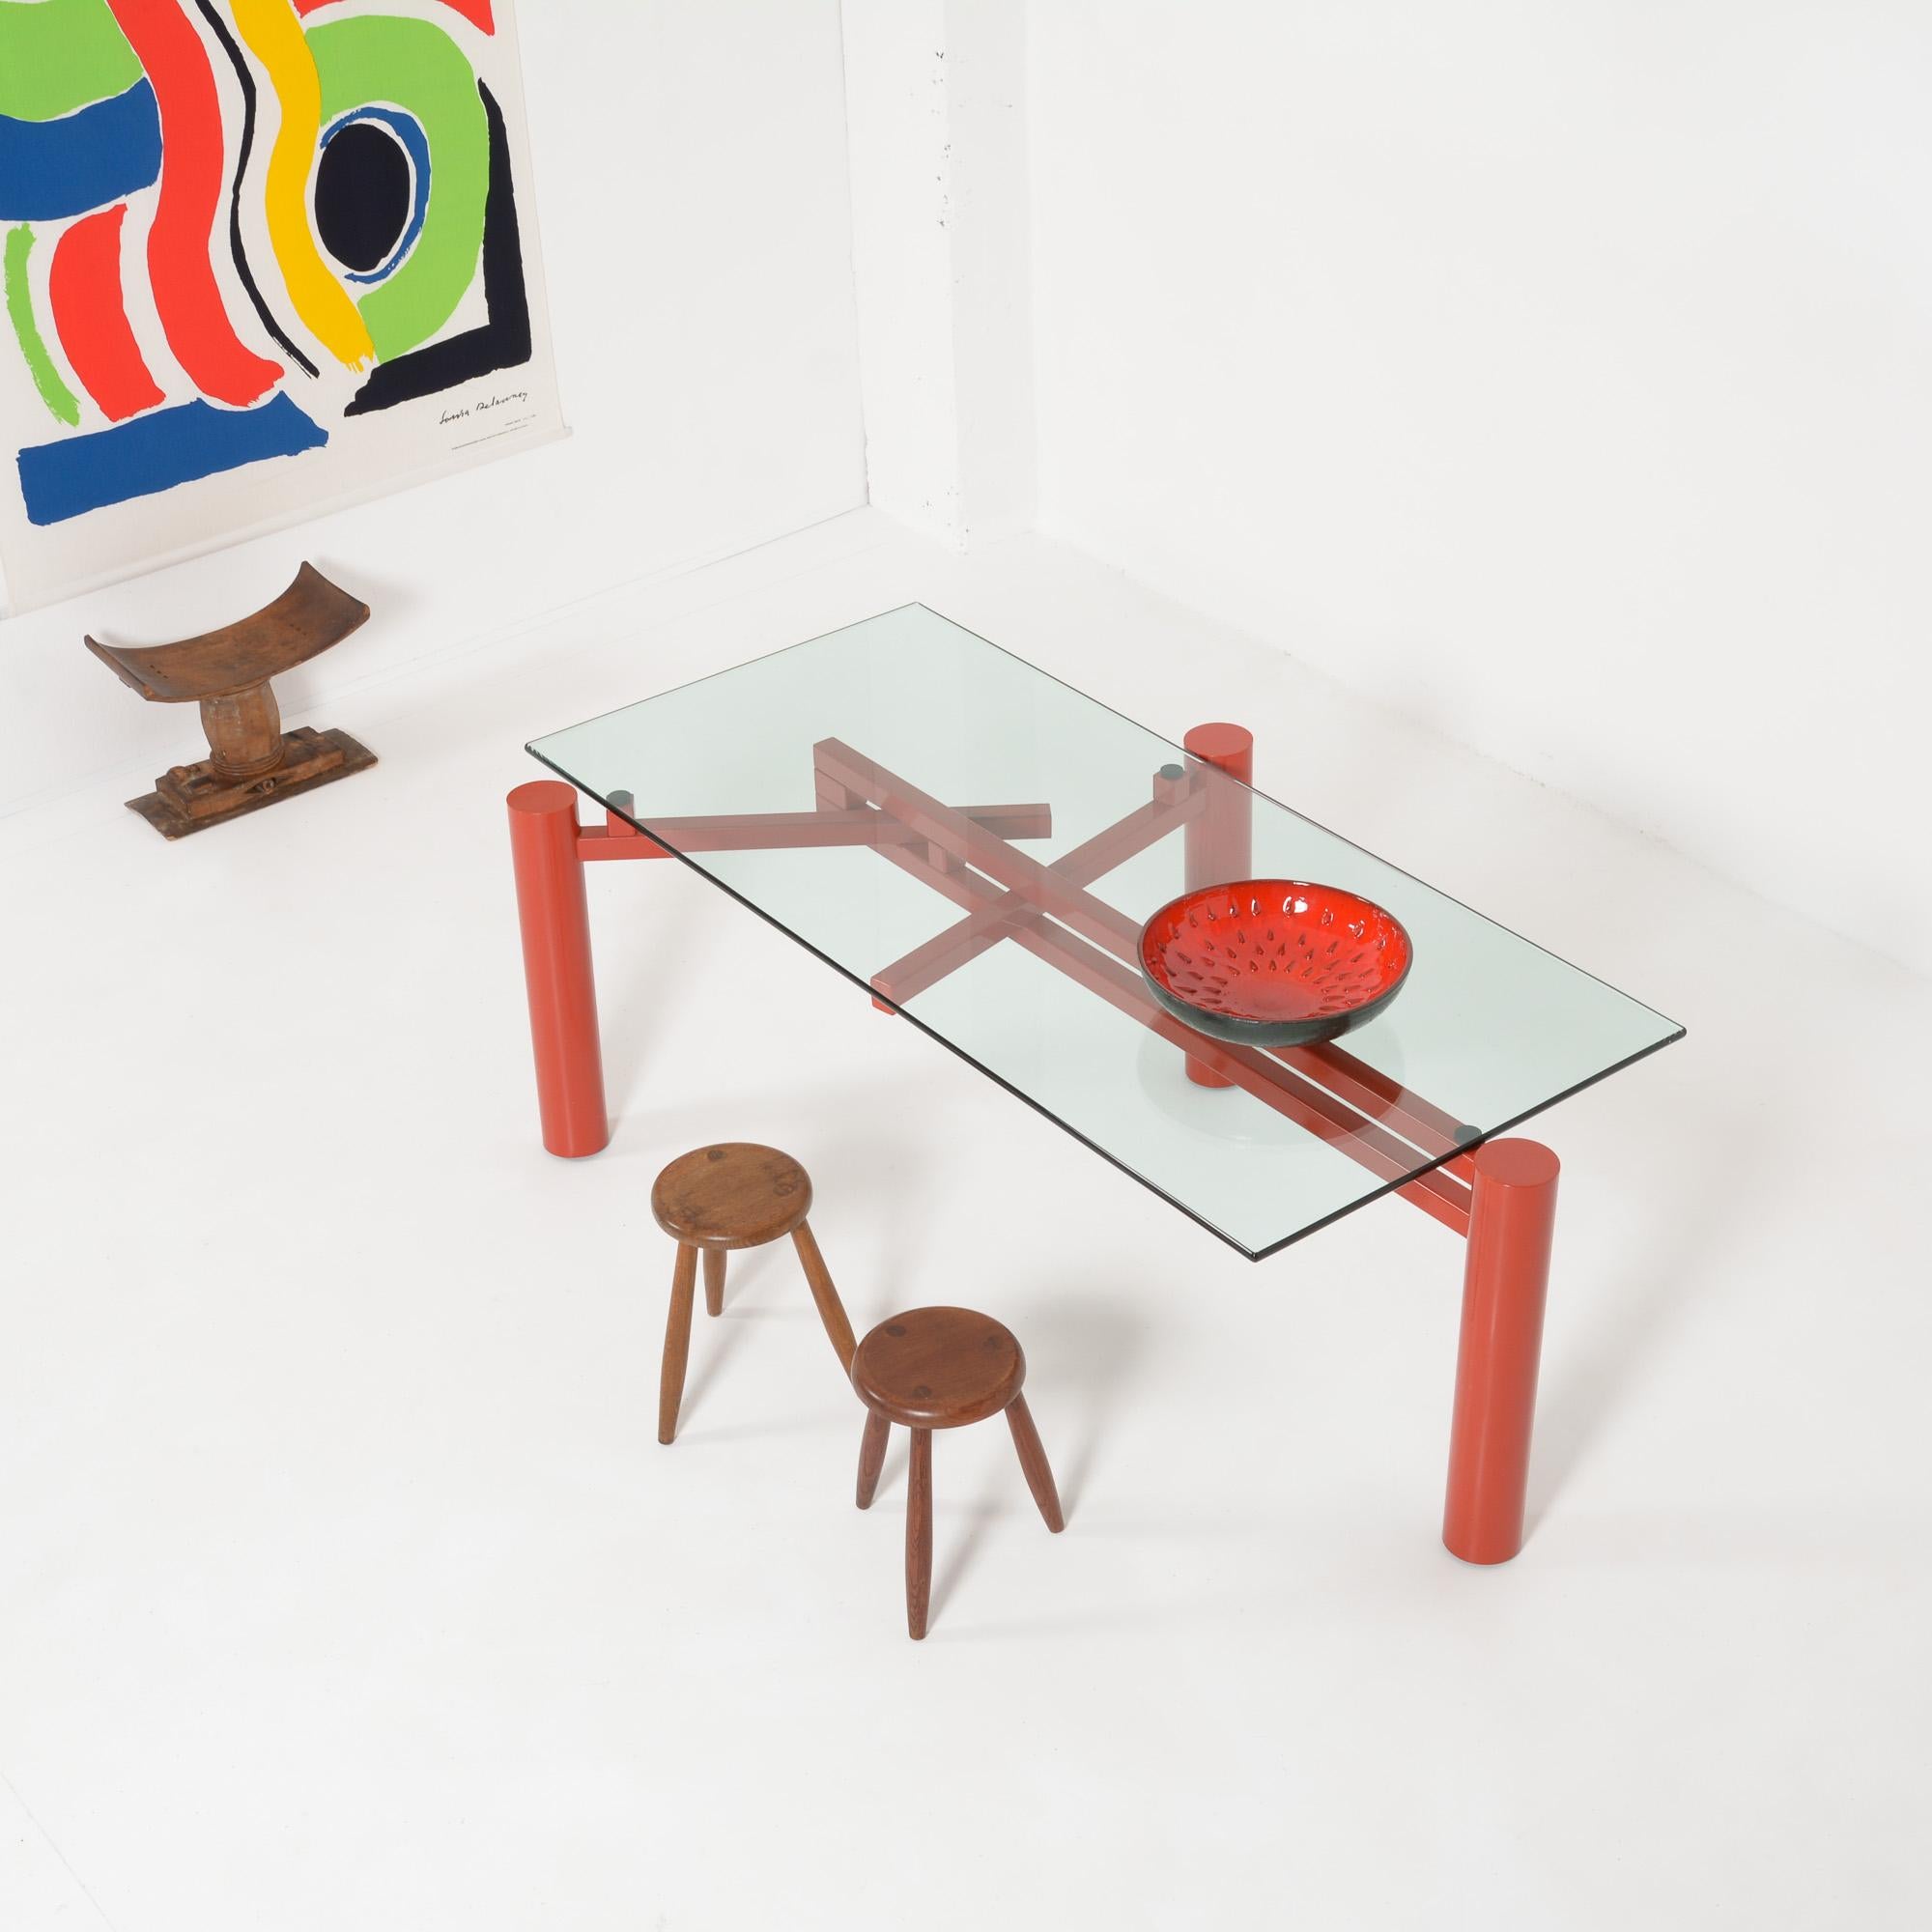 Post-Modern Constructivist Dining Table by Christophe Gevers